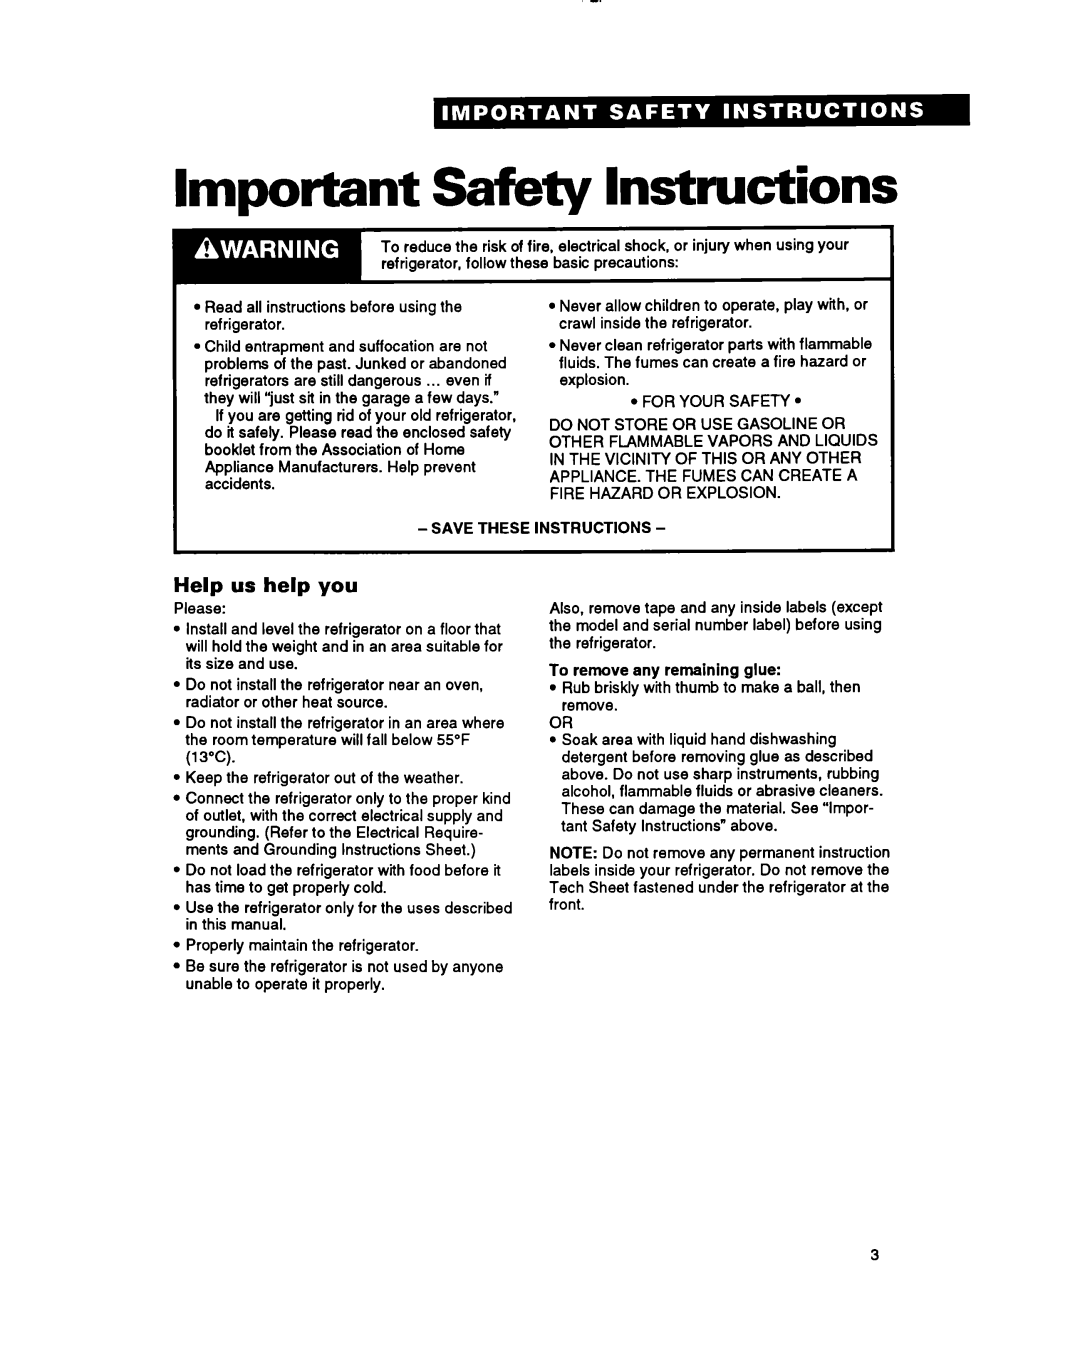 Whirlpool TT18CK Important Safety Instructions, Help us help you, Save These Instructions, To remove any remaining glue 